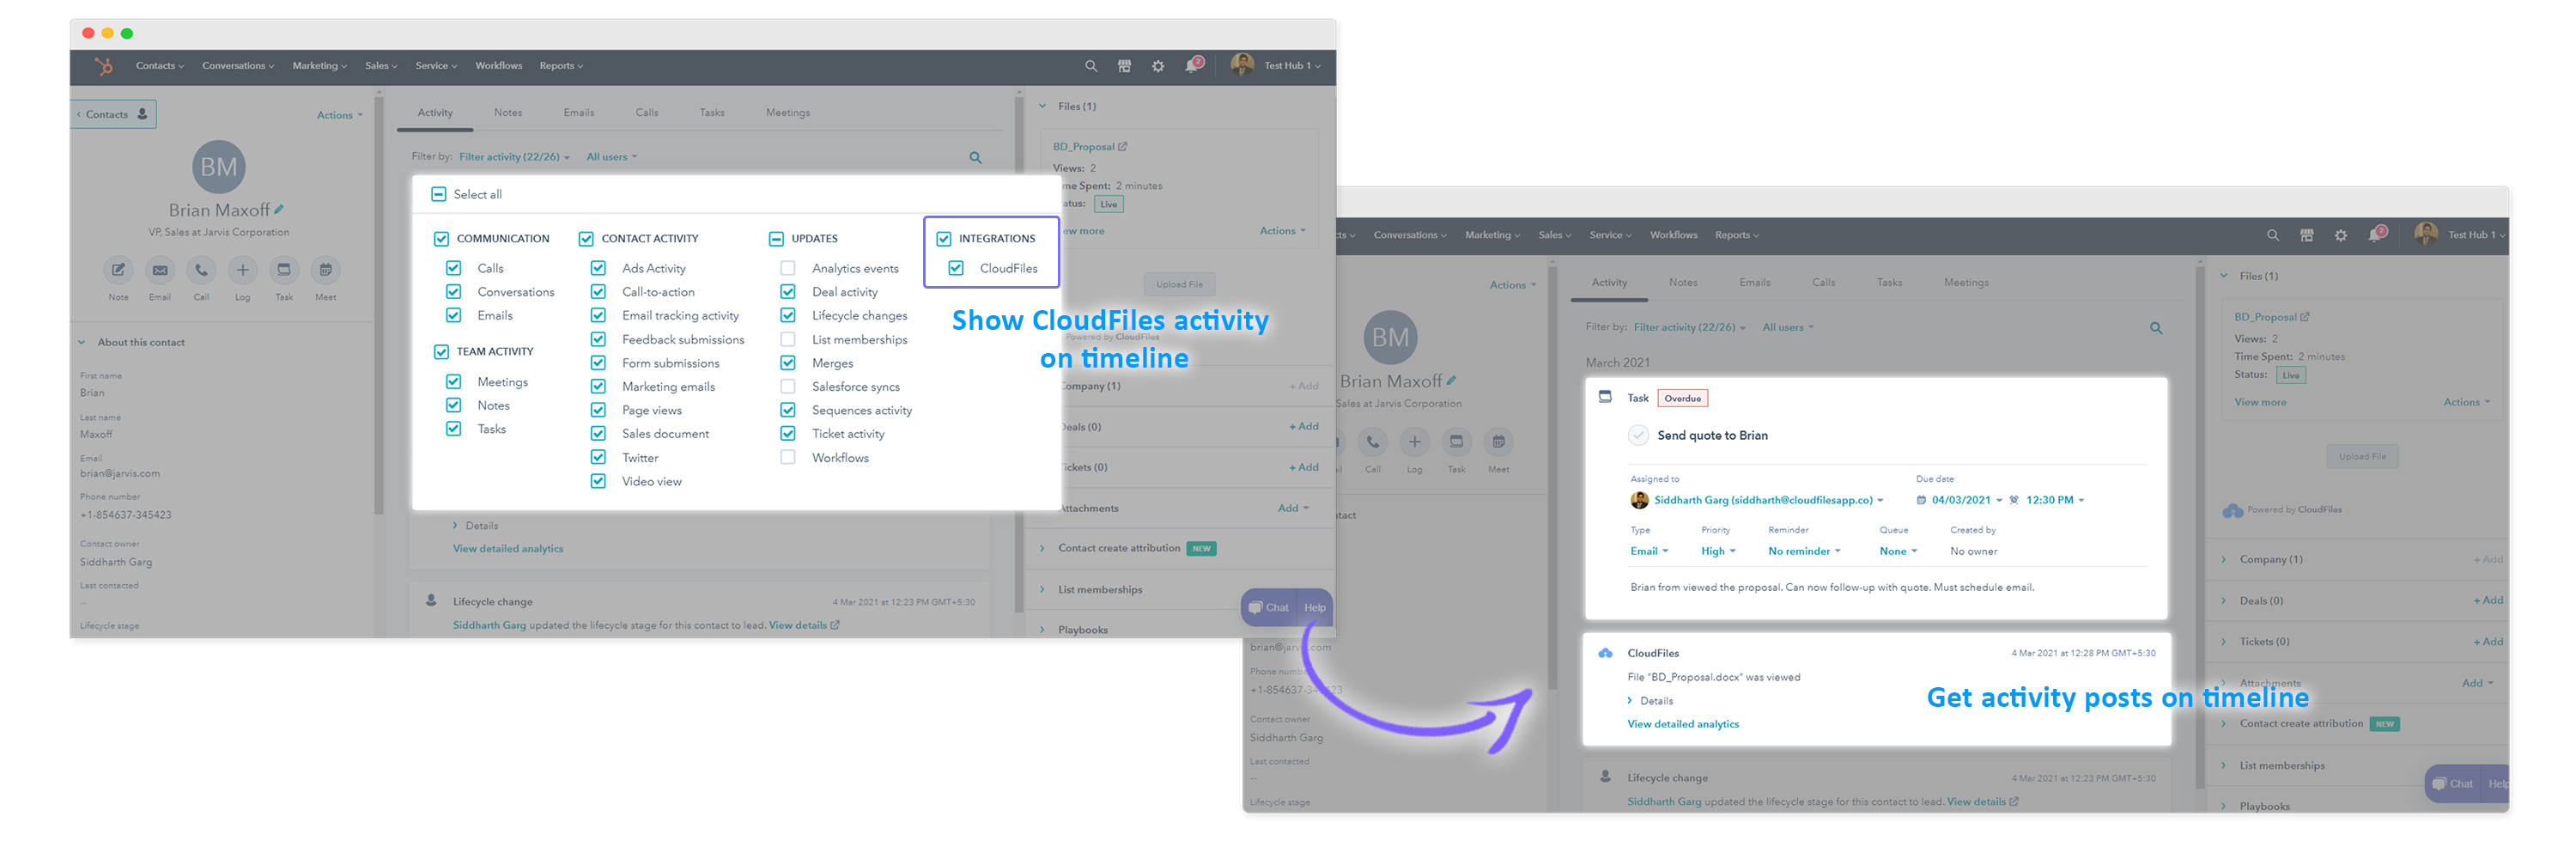 Getting activity posted on your timeline by CloudFiles